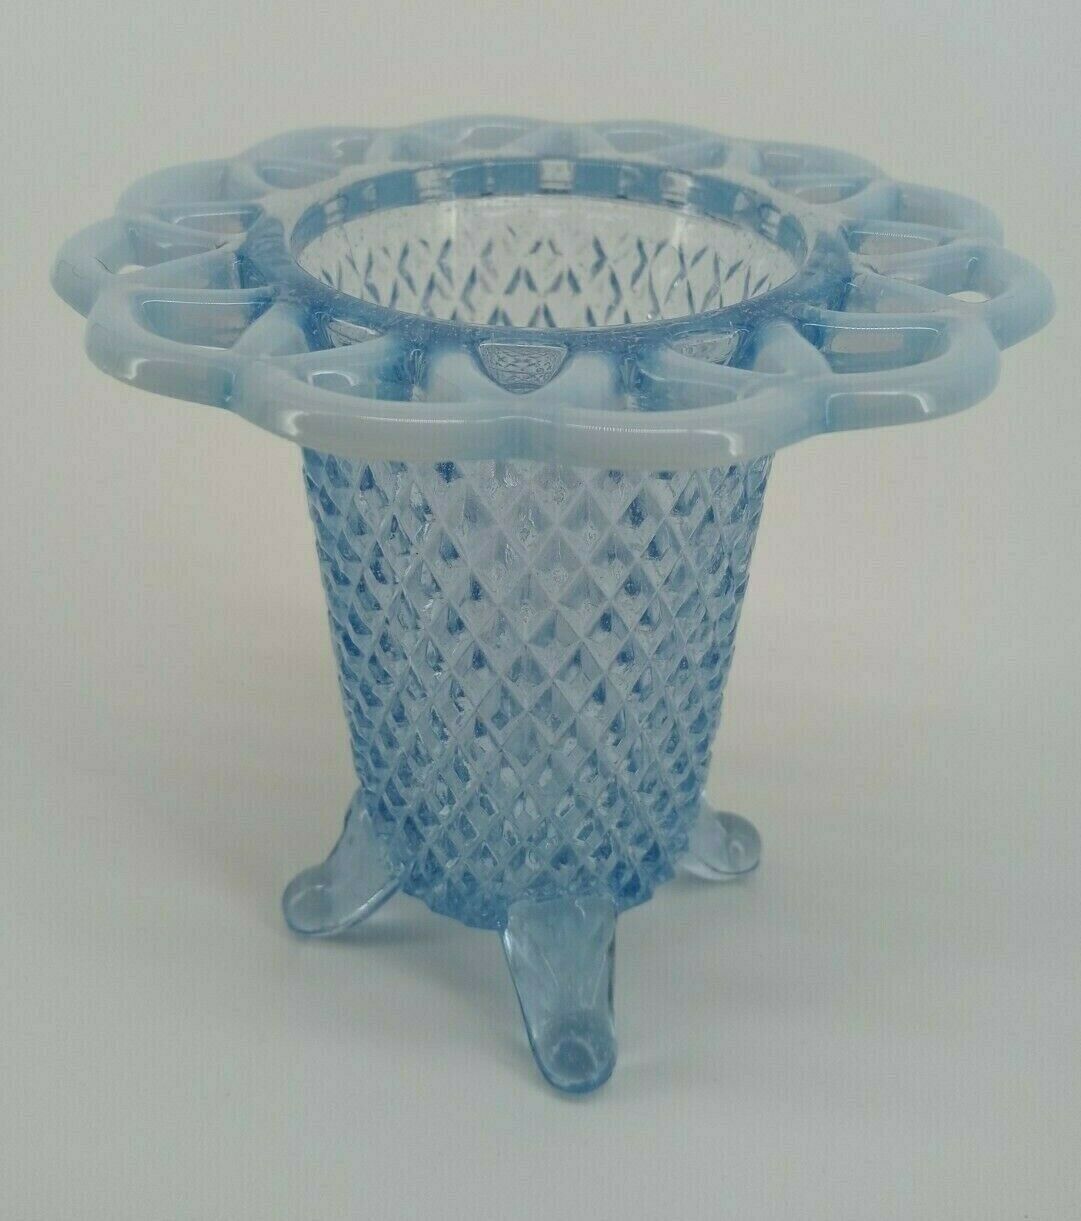 Glass Vase Vintage Blue Laced Edge Opalescent Imperial Diamond Pattern Footed